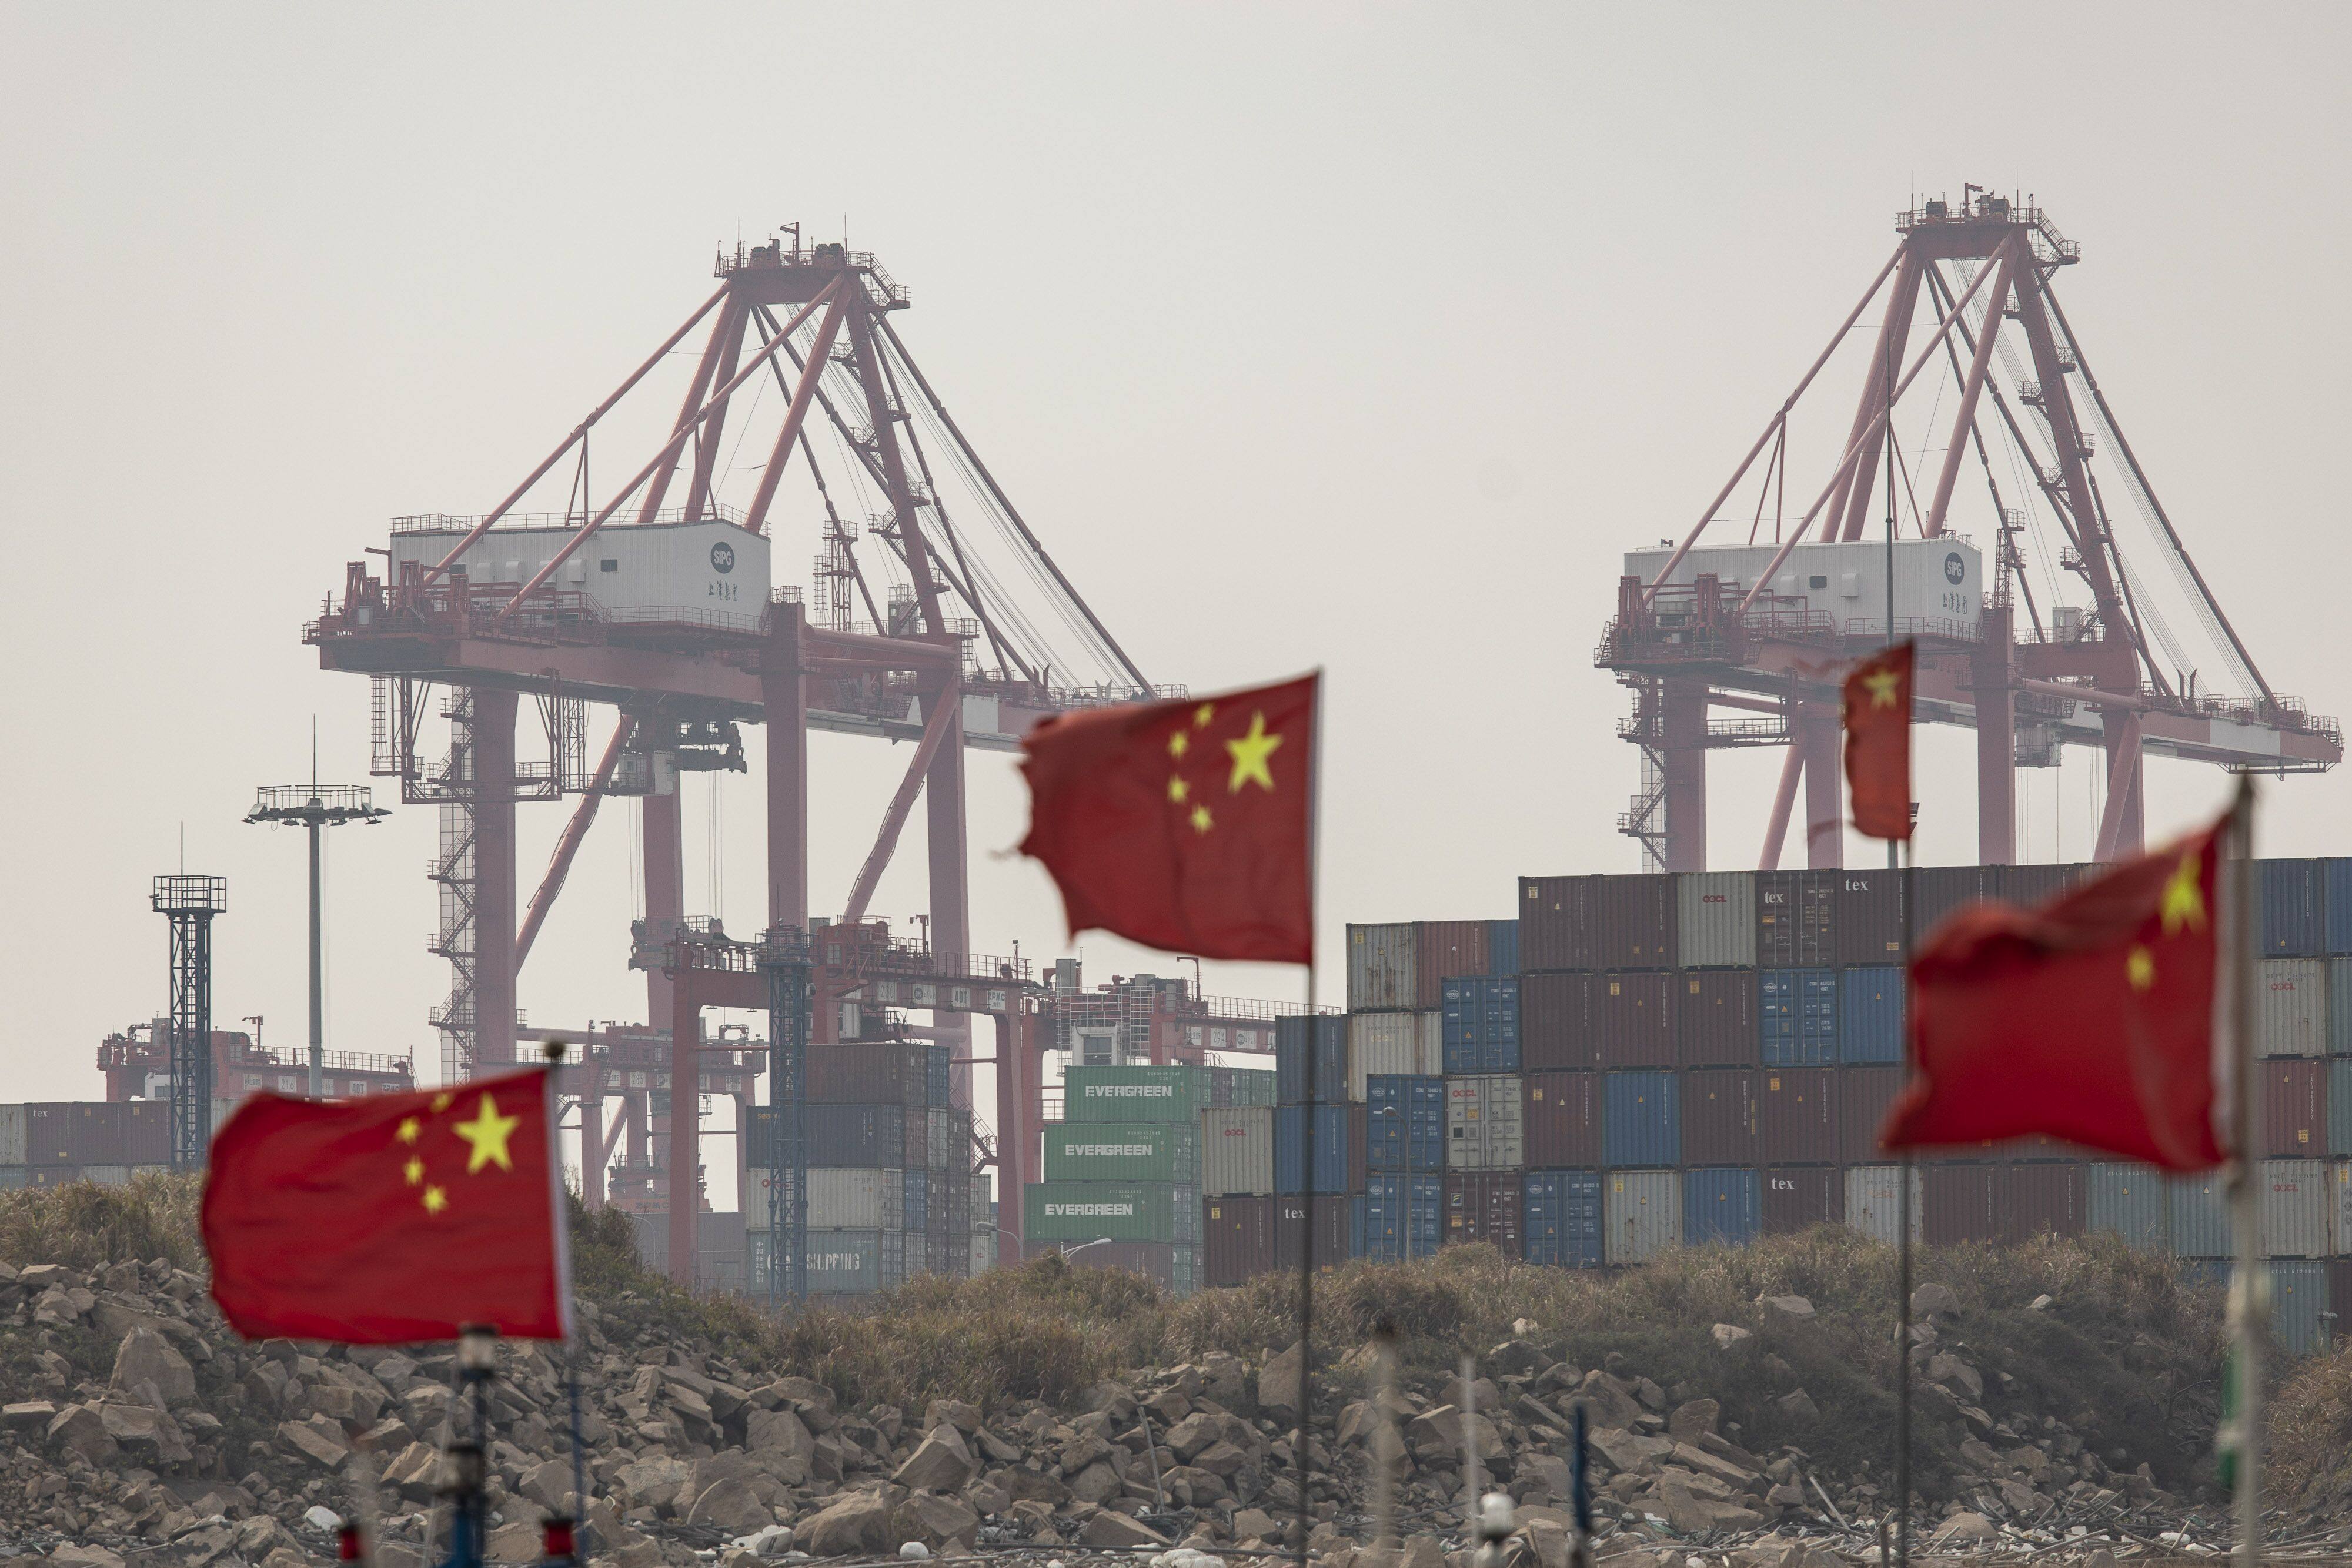 China’s exports fell by 7.5 per cent in March compared to a year earlier. Photo: Bloomberg